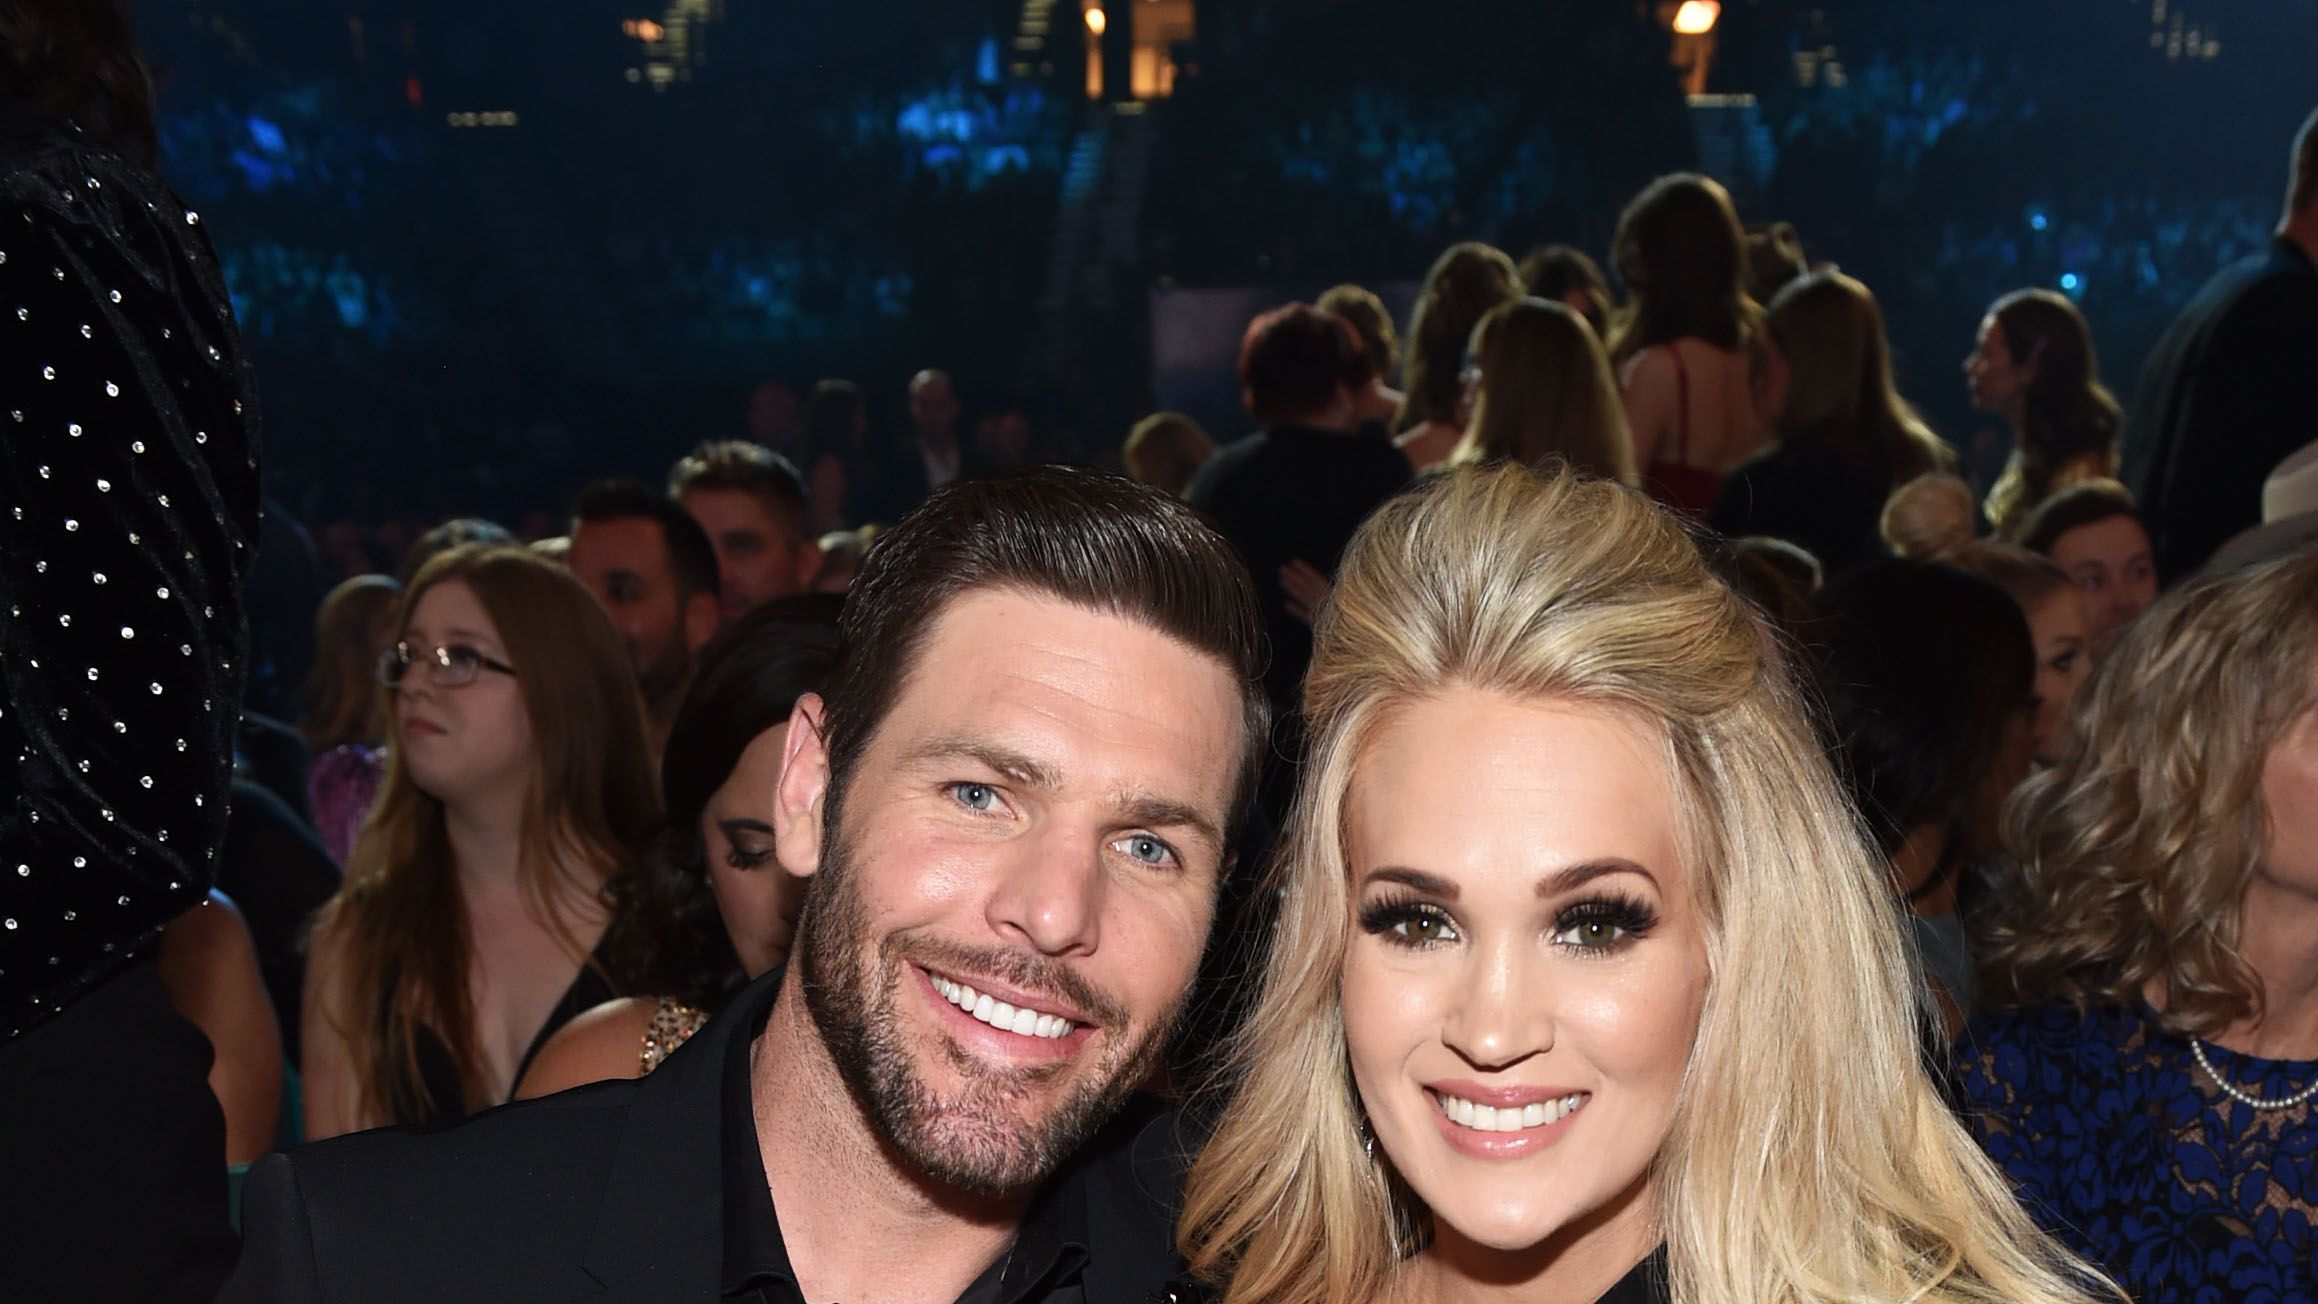 Carrie Underwood Makes Appearance Without Mike Fisher